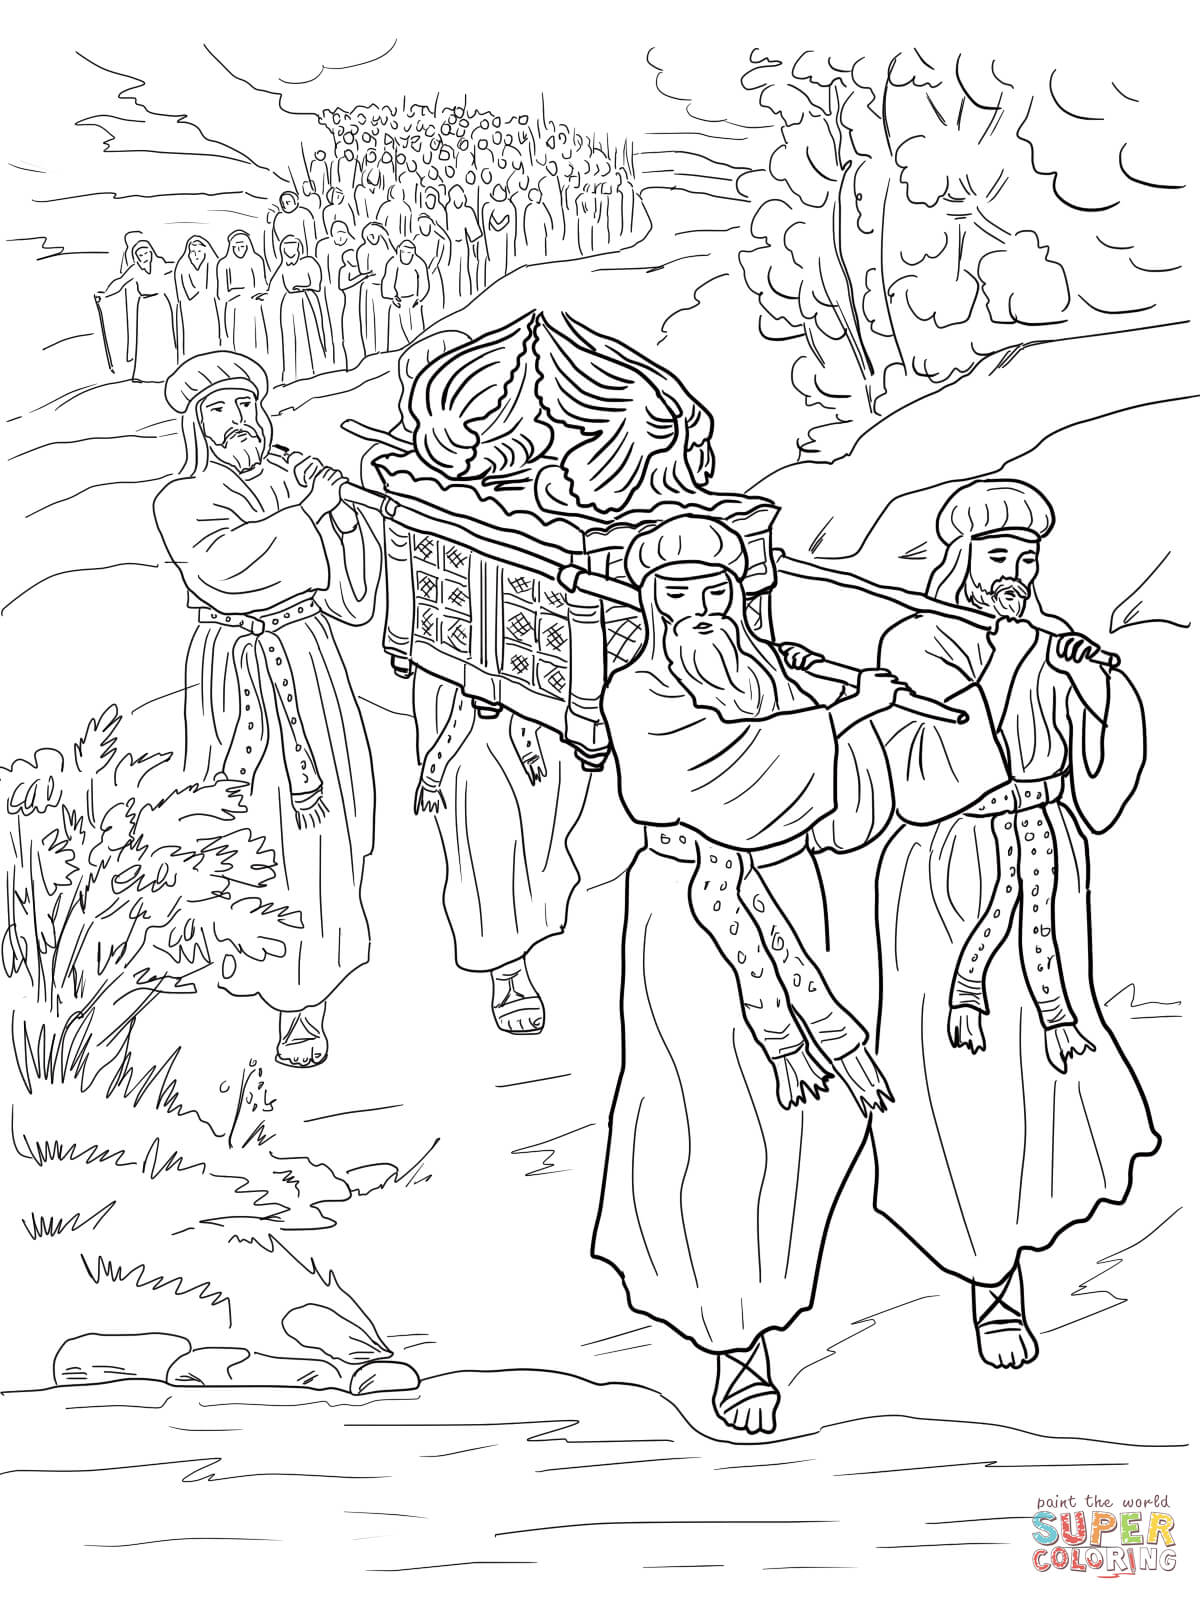 Joshua and the israelites cross the jordan river coloring page free printable coloring pages